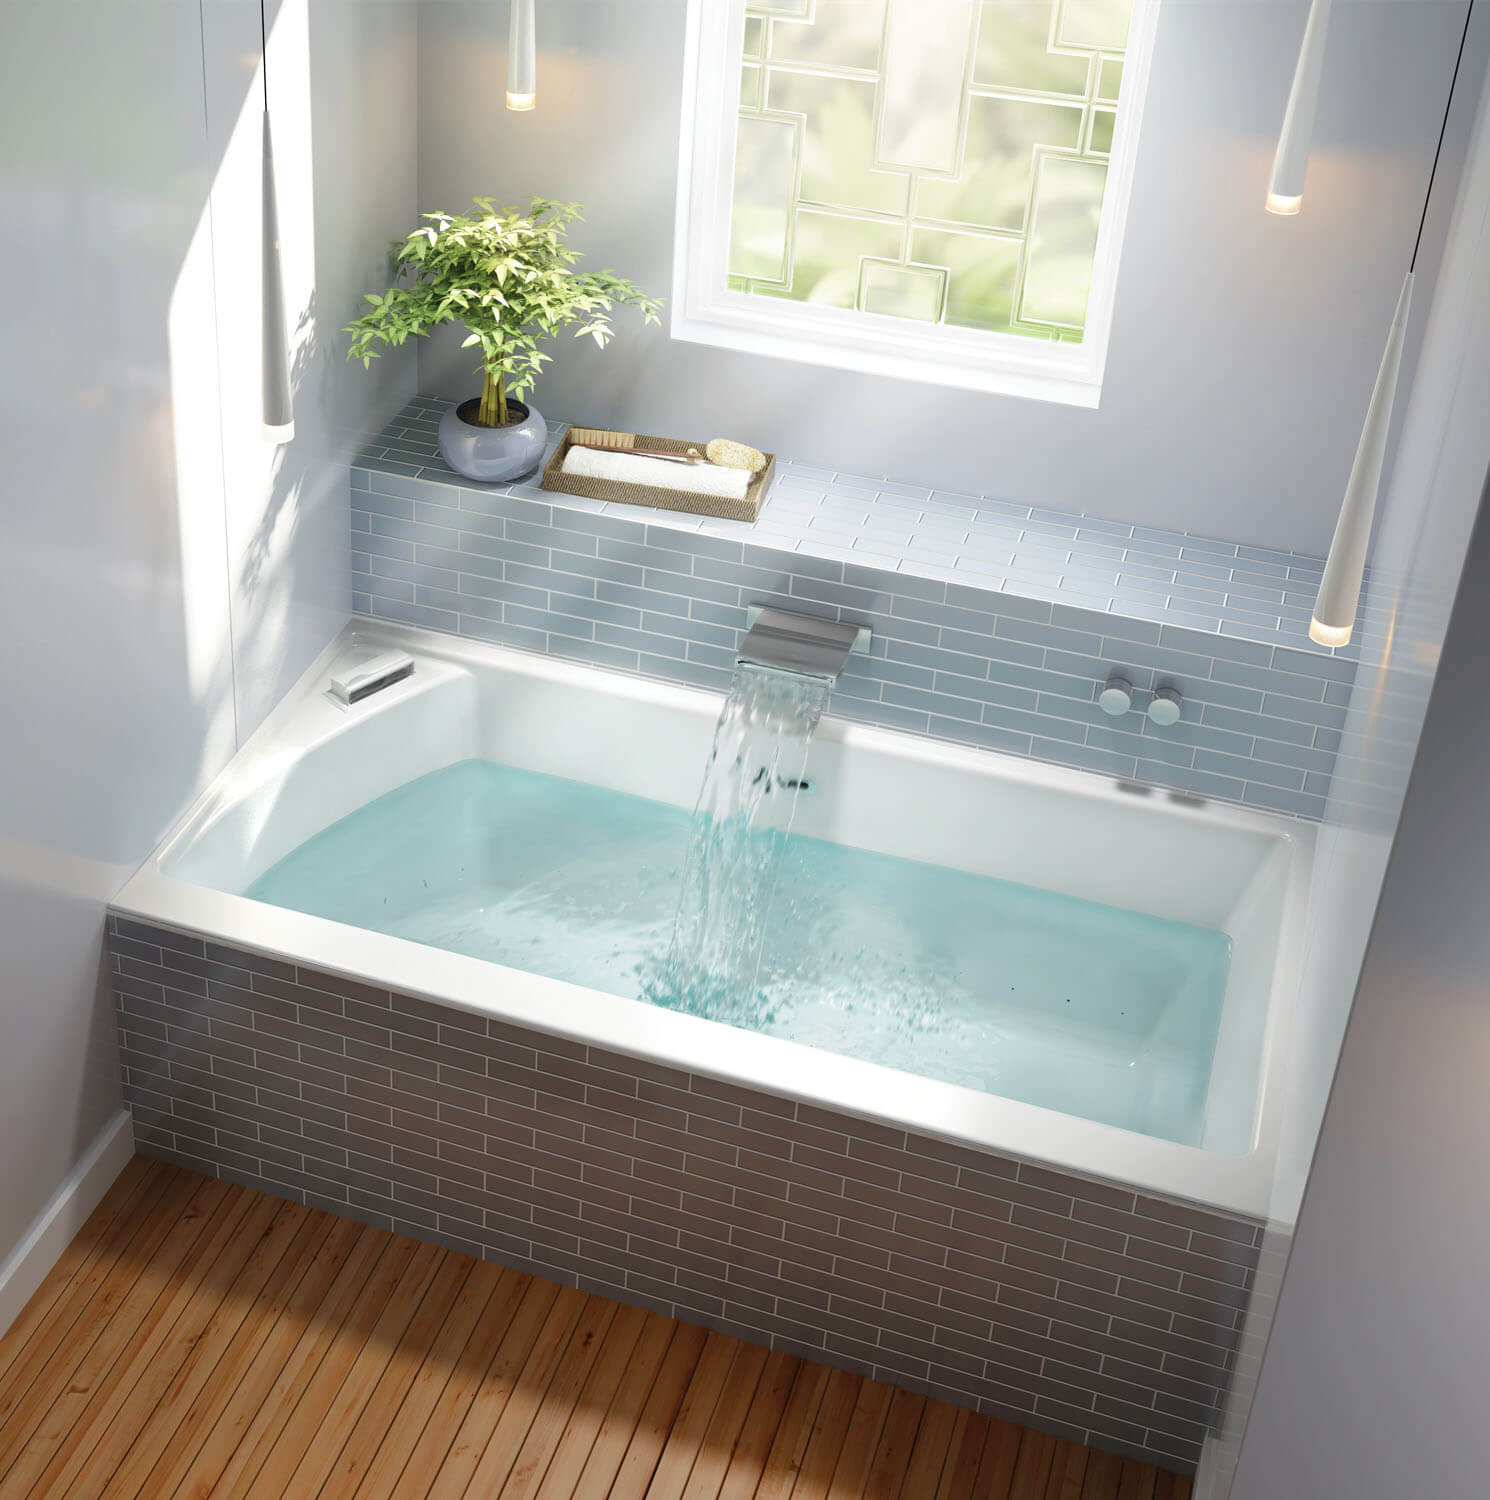 Bainultra Citti 6032 TRIO without insert alcove air jet bathtub for your master bathroom